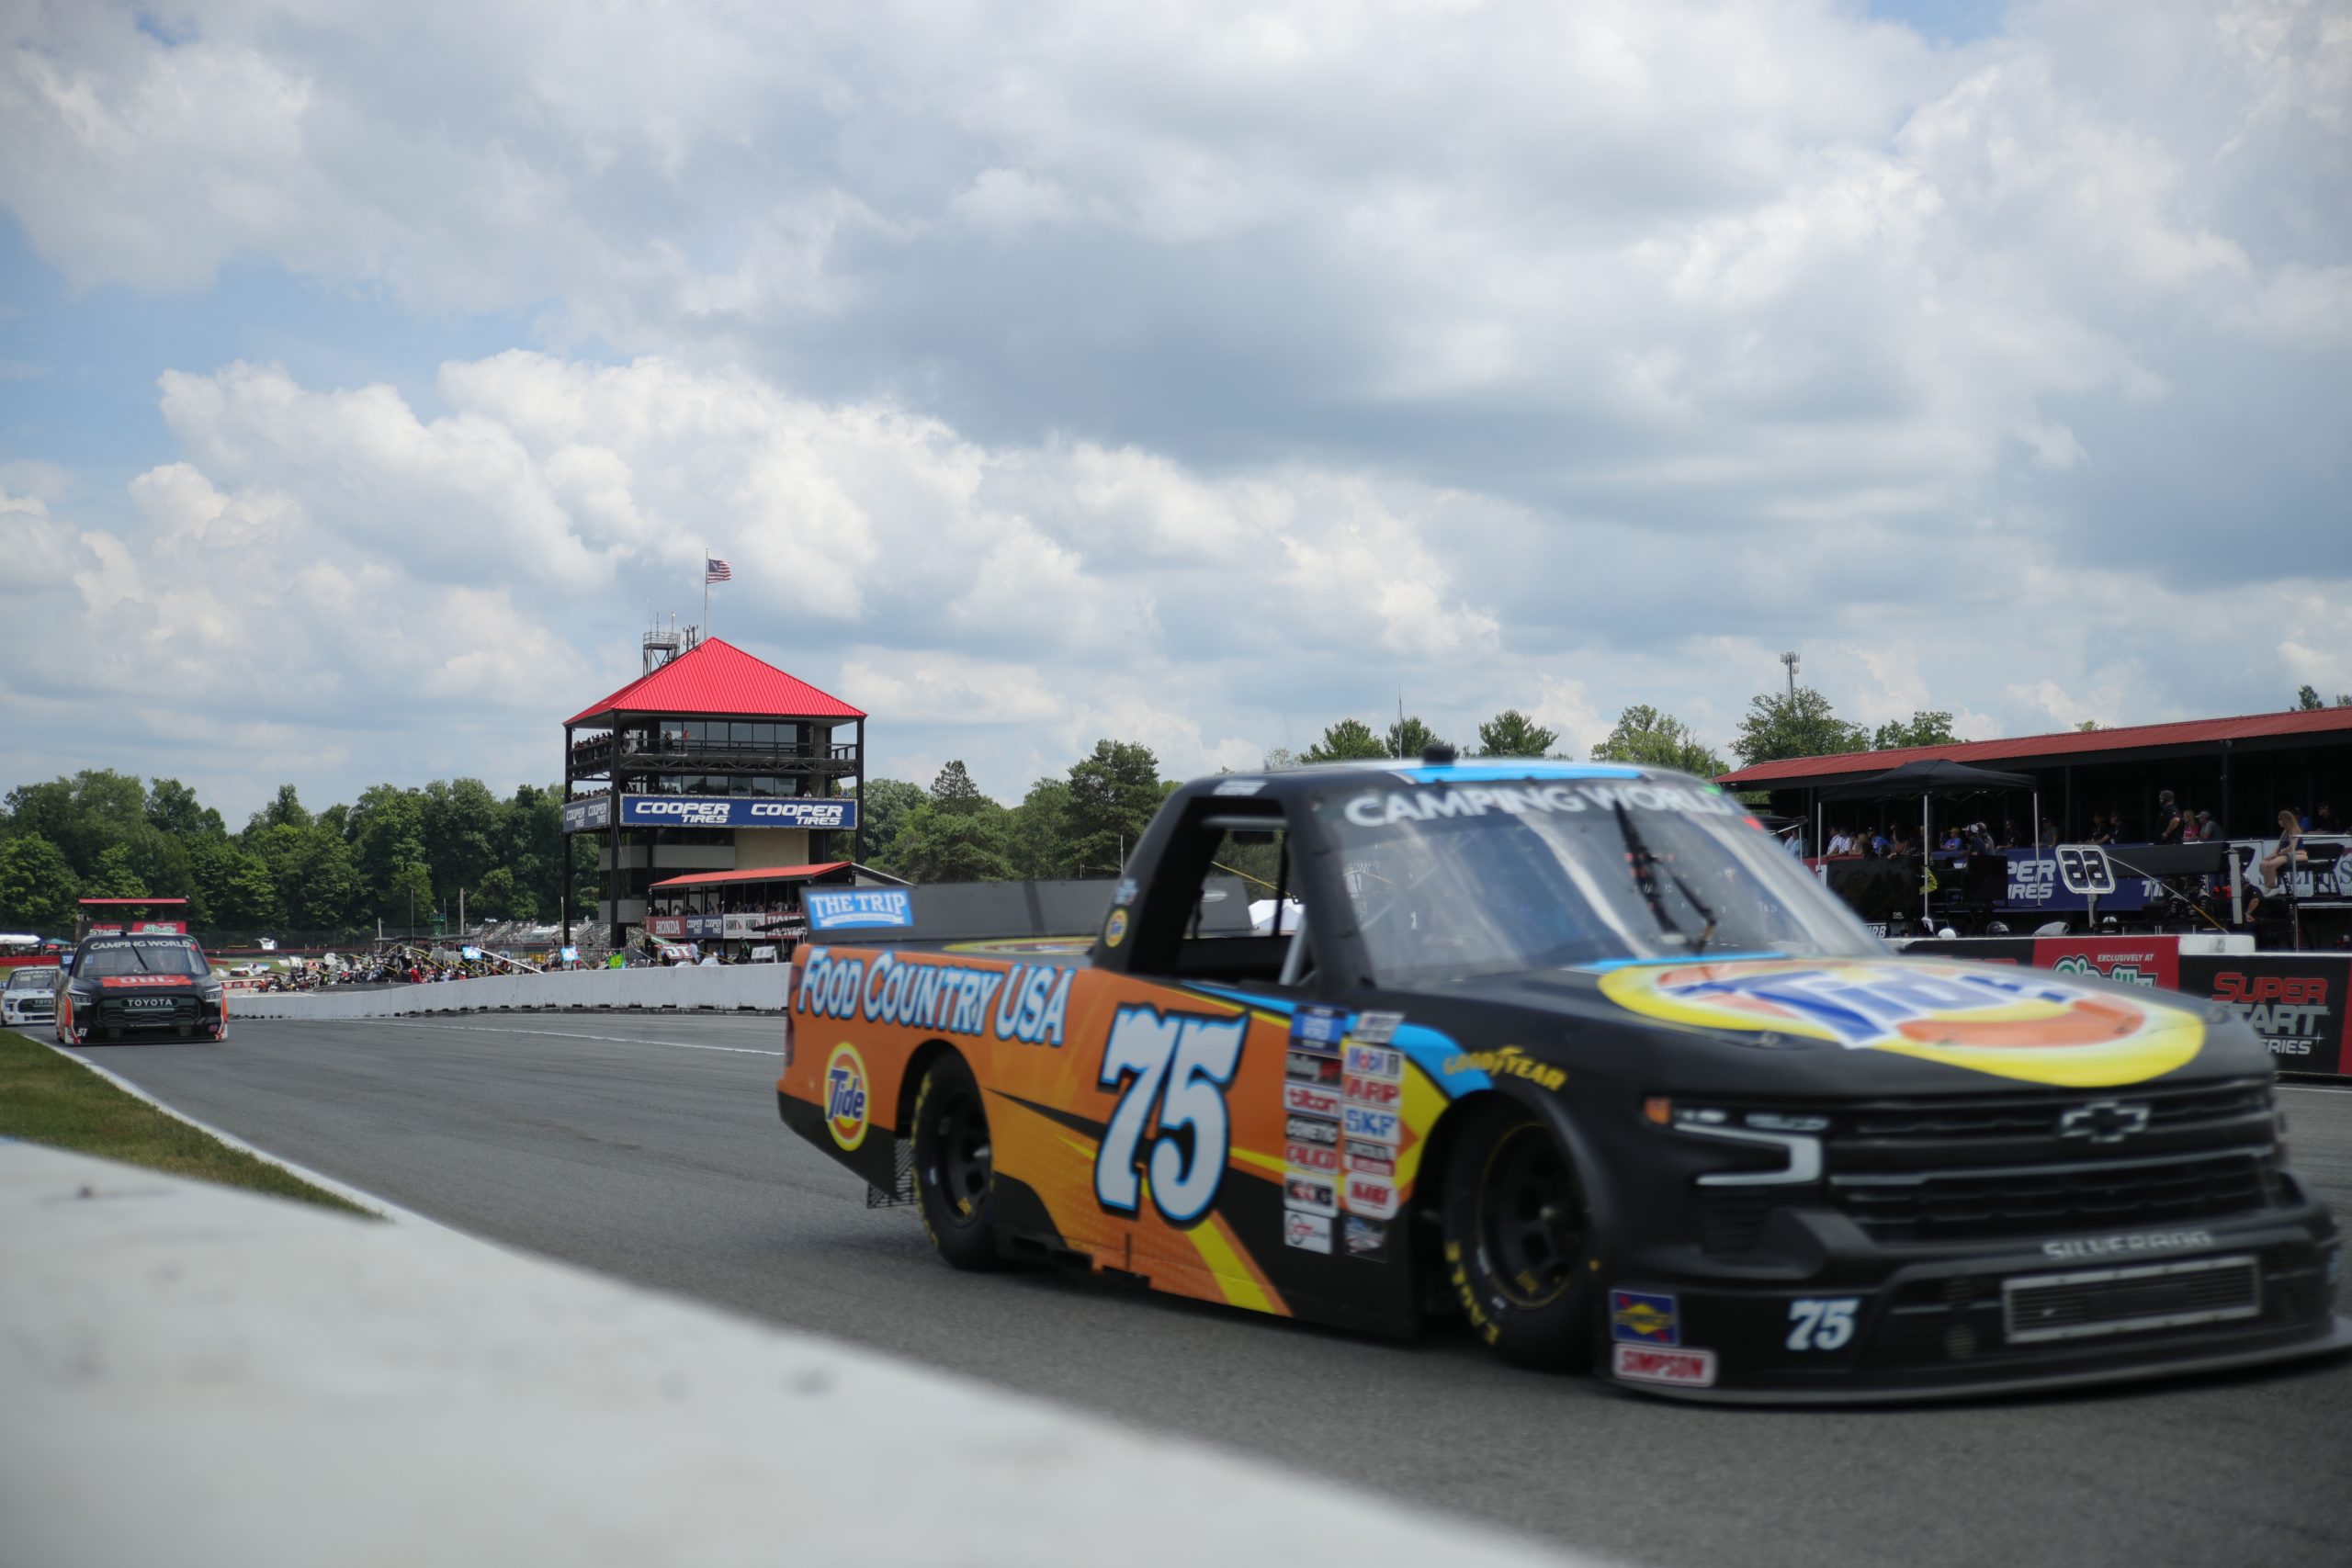 Certainly, Kligerman showcased his prowess in the No. 75 Chevy. (Photo: Taylor Kitchen | The Podium Finish)